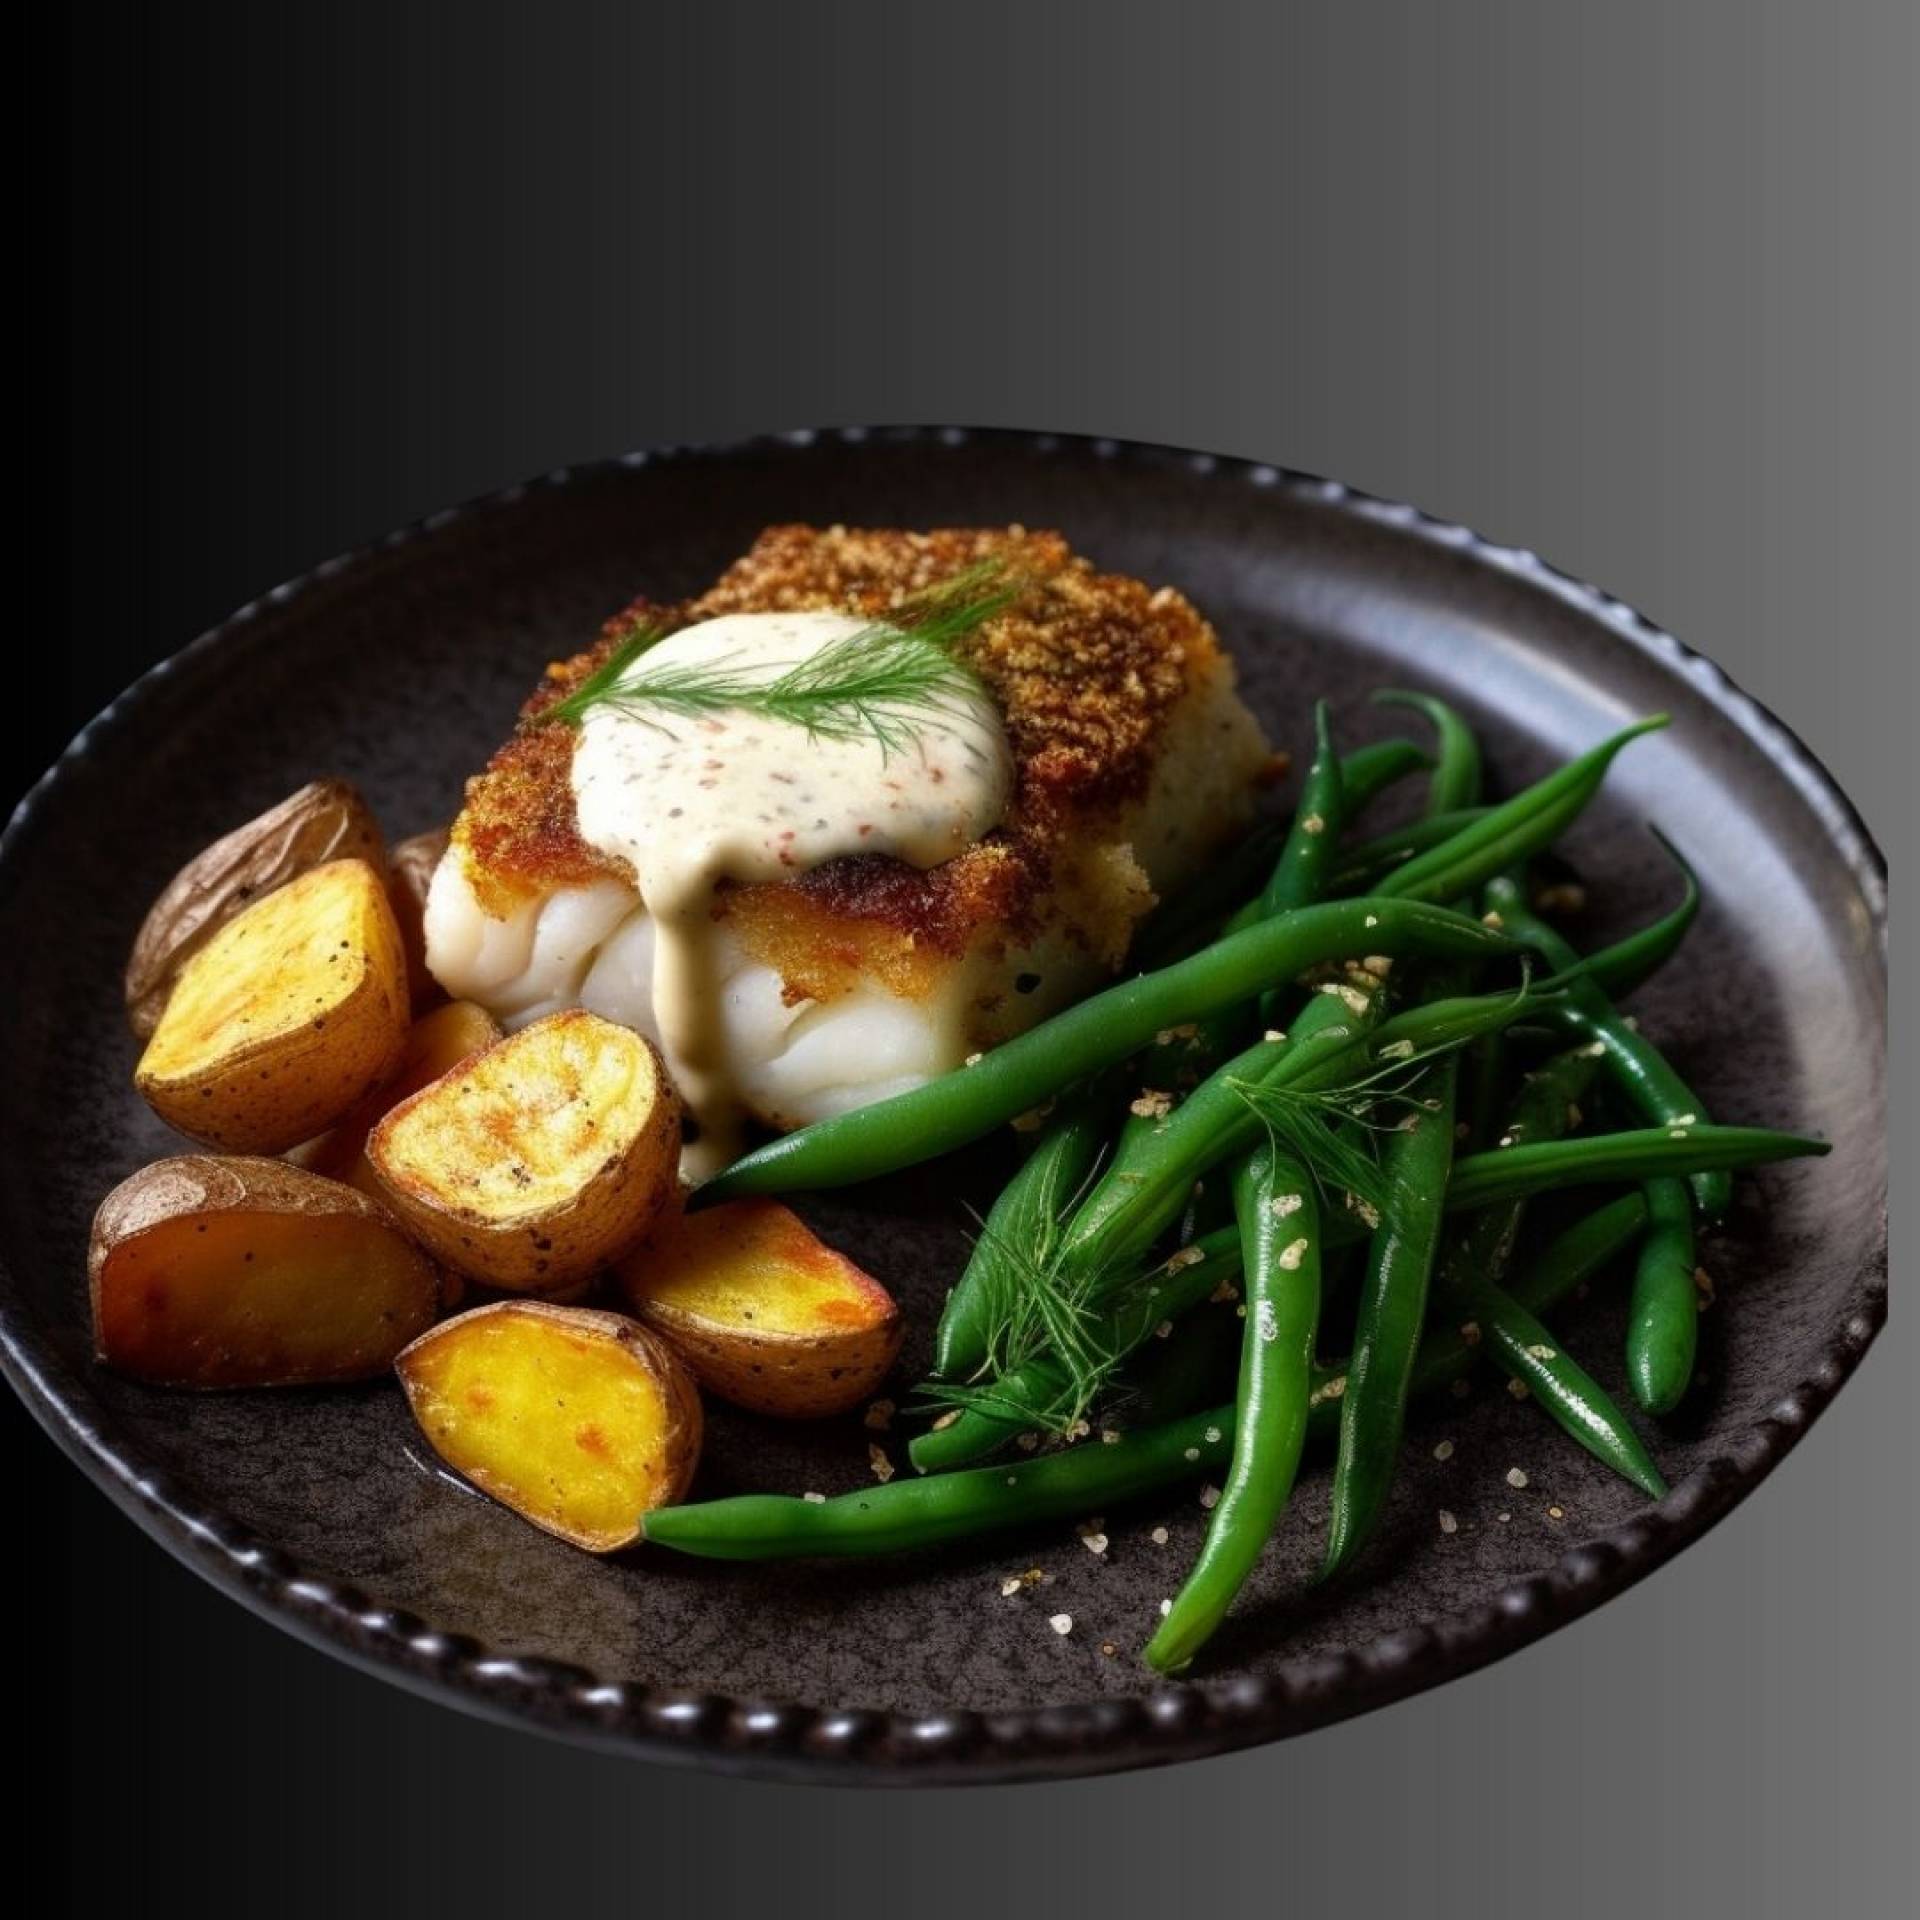 Herb-Crusted Cod with Lemon Aioli, Charred Haricot Verts and Roasted Potatoes